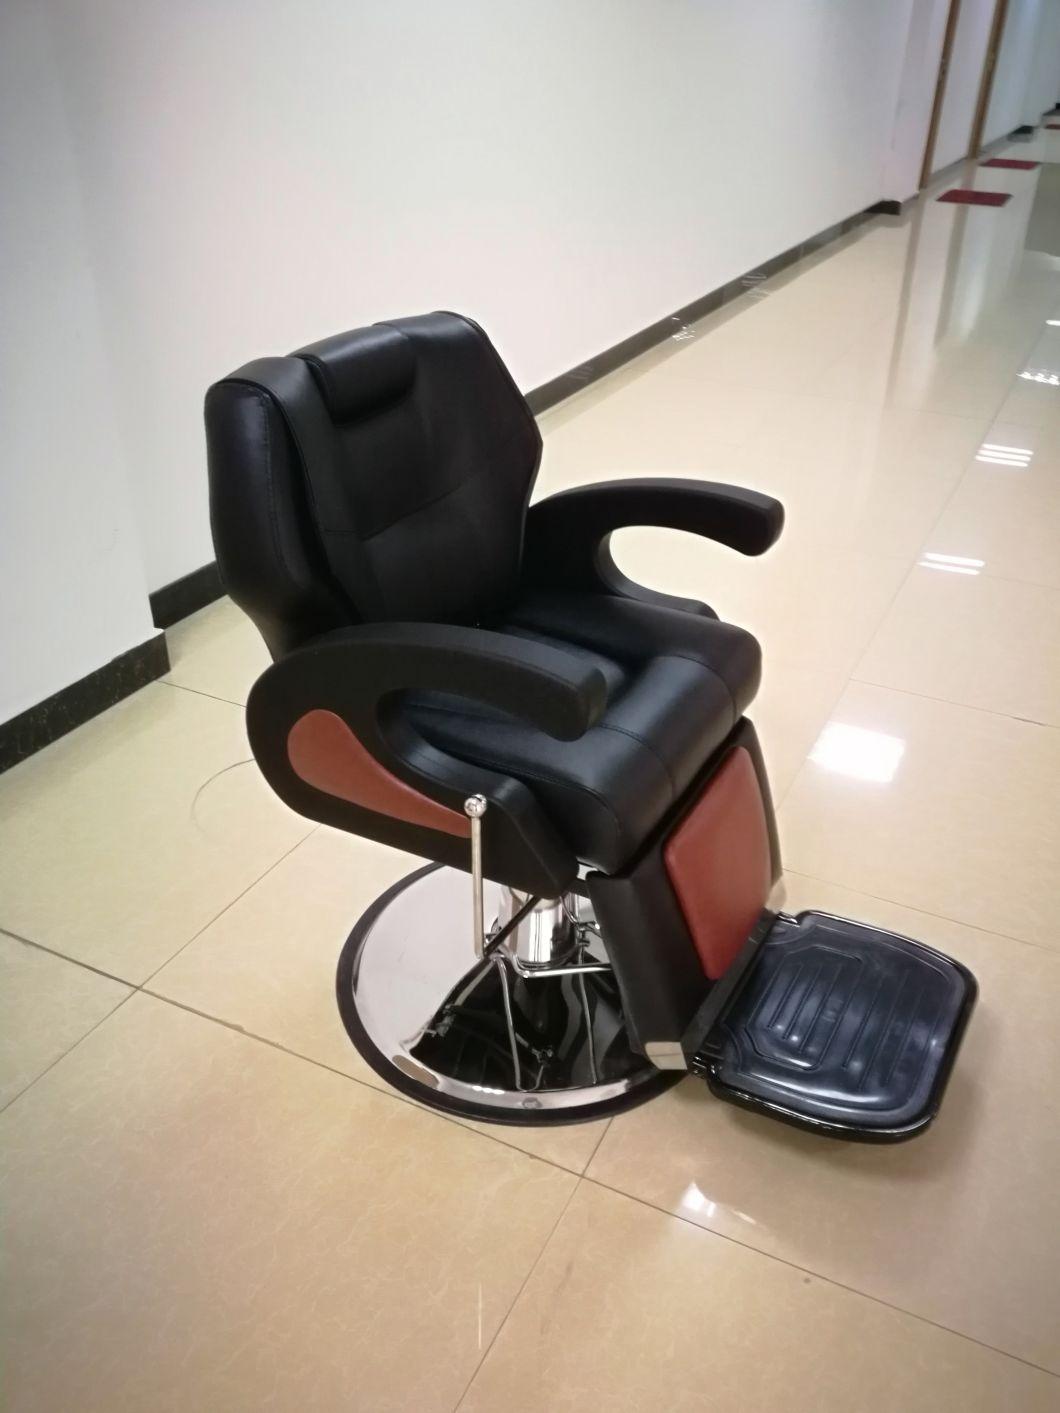 Hl-9254 Salon Barber Chair for Man or Woman with Stainless Steel Armrest and Aluminum Pedal